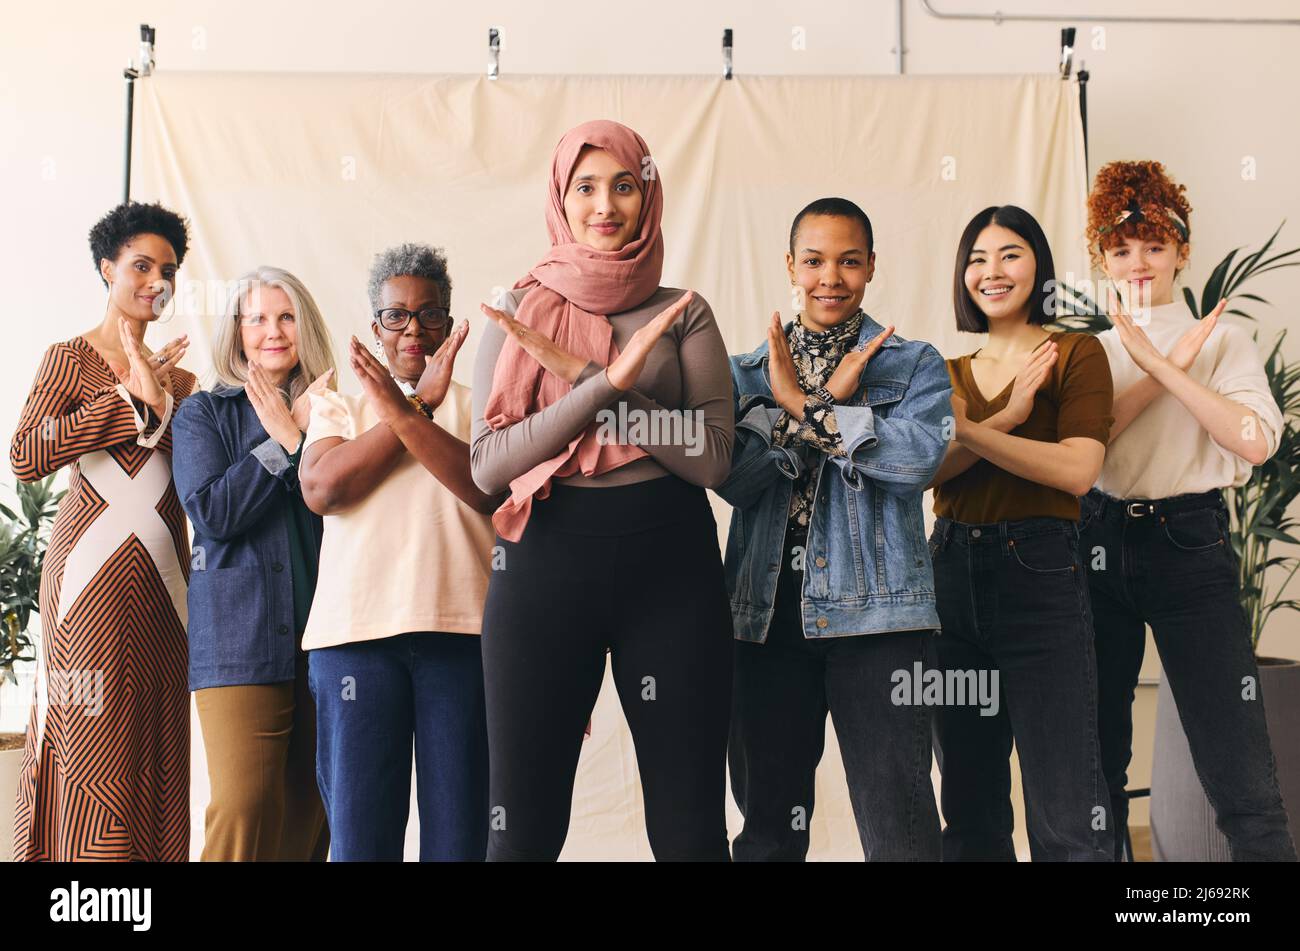 Middle Eastern woman wearing hajib gesturing Break The Bias in support of International Women's Day with female friends Stock Photo